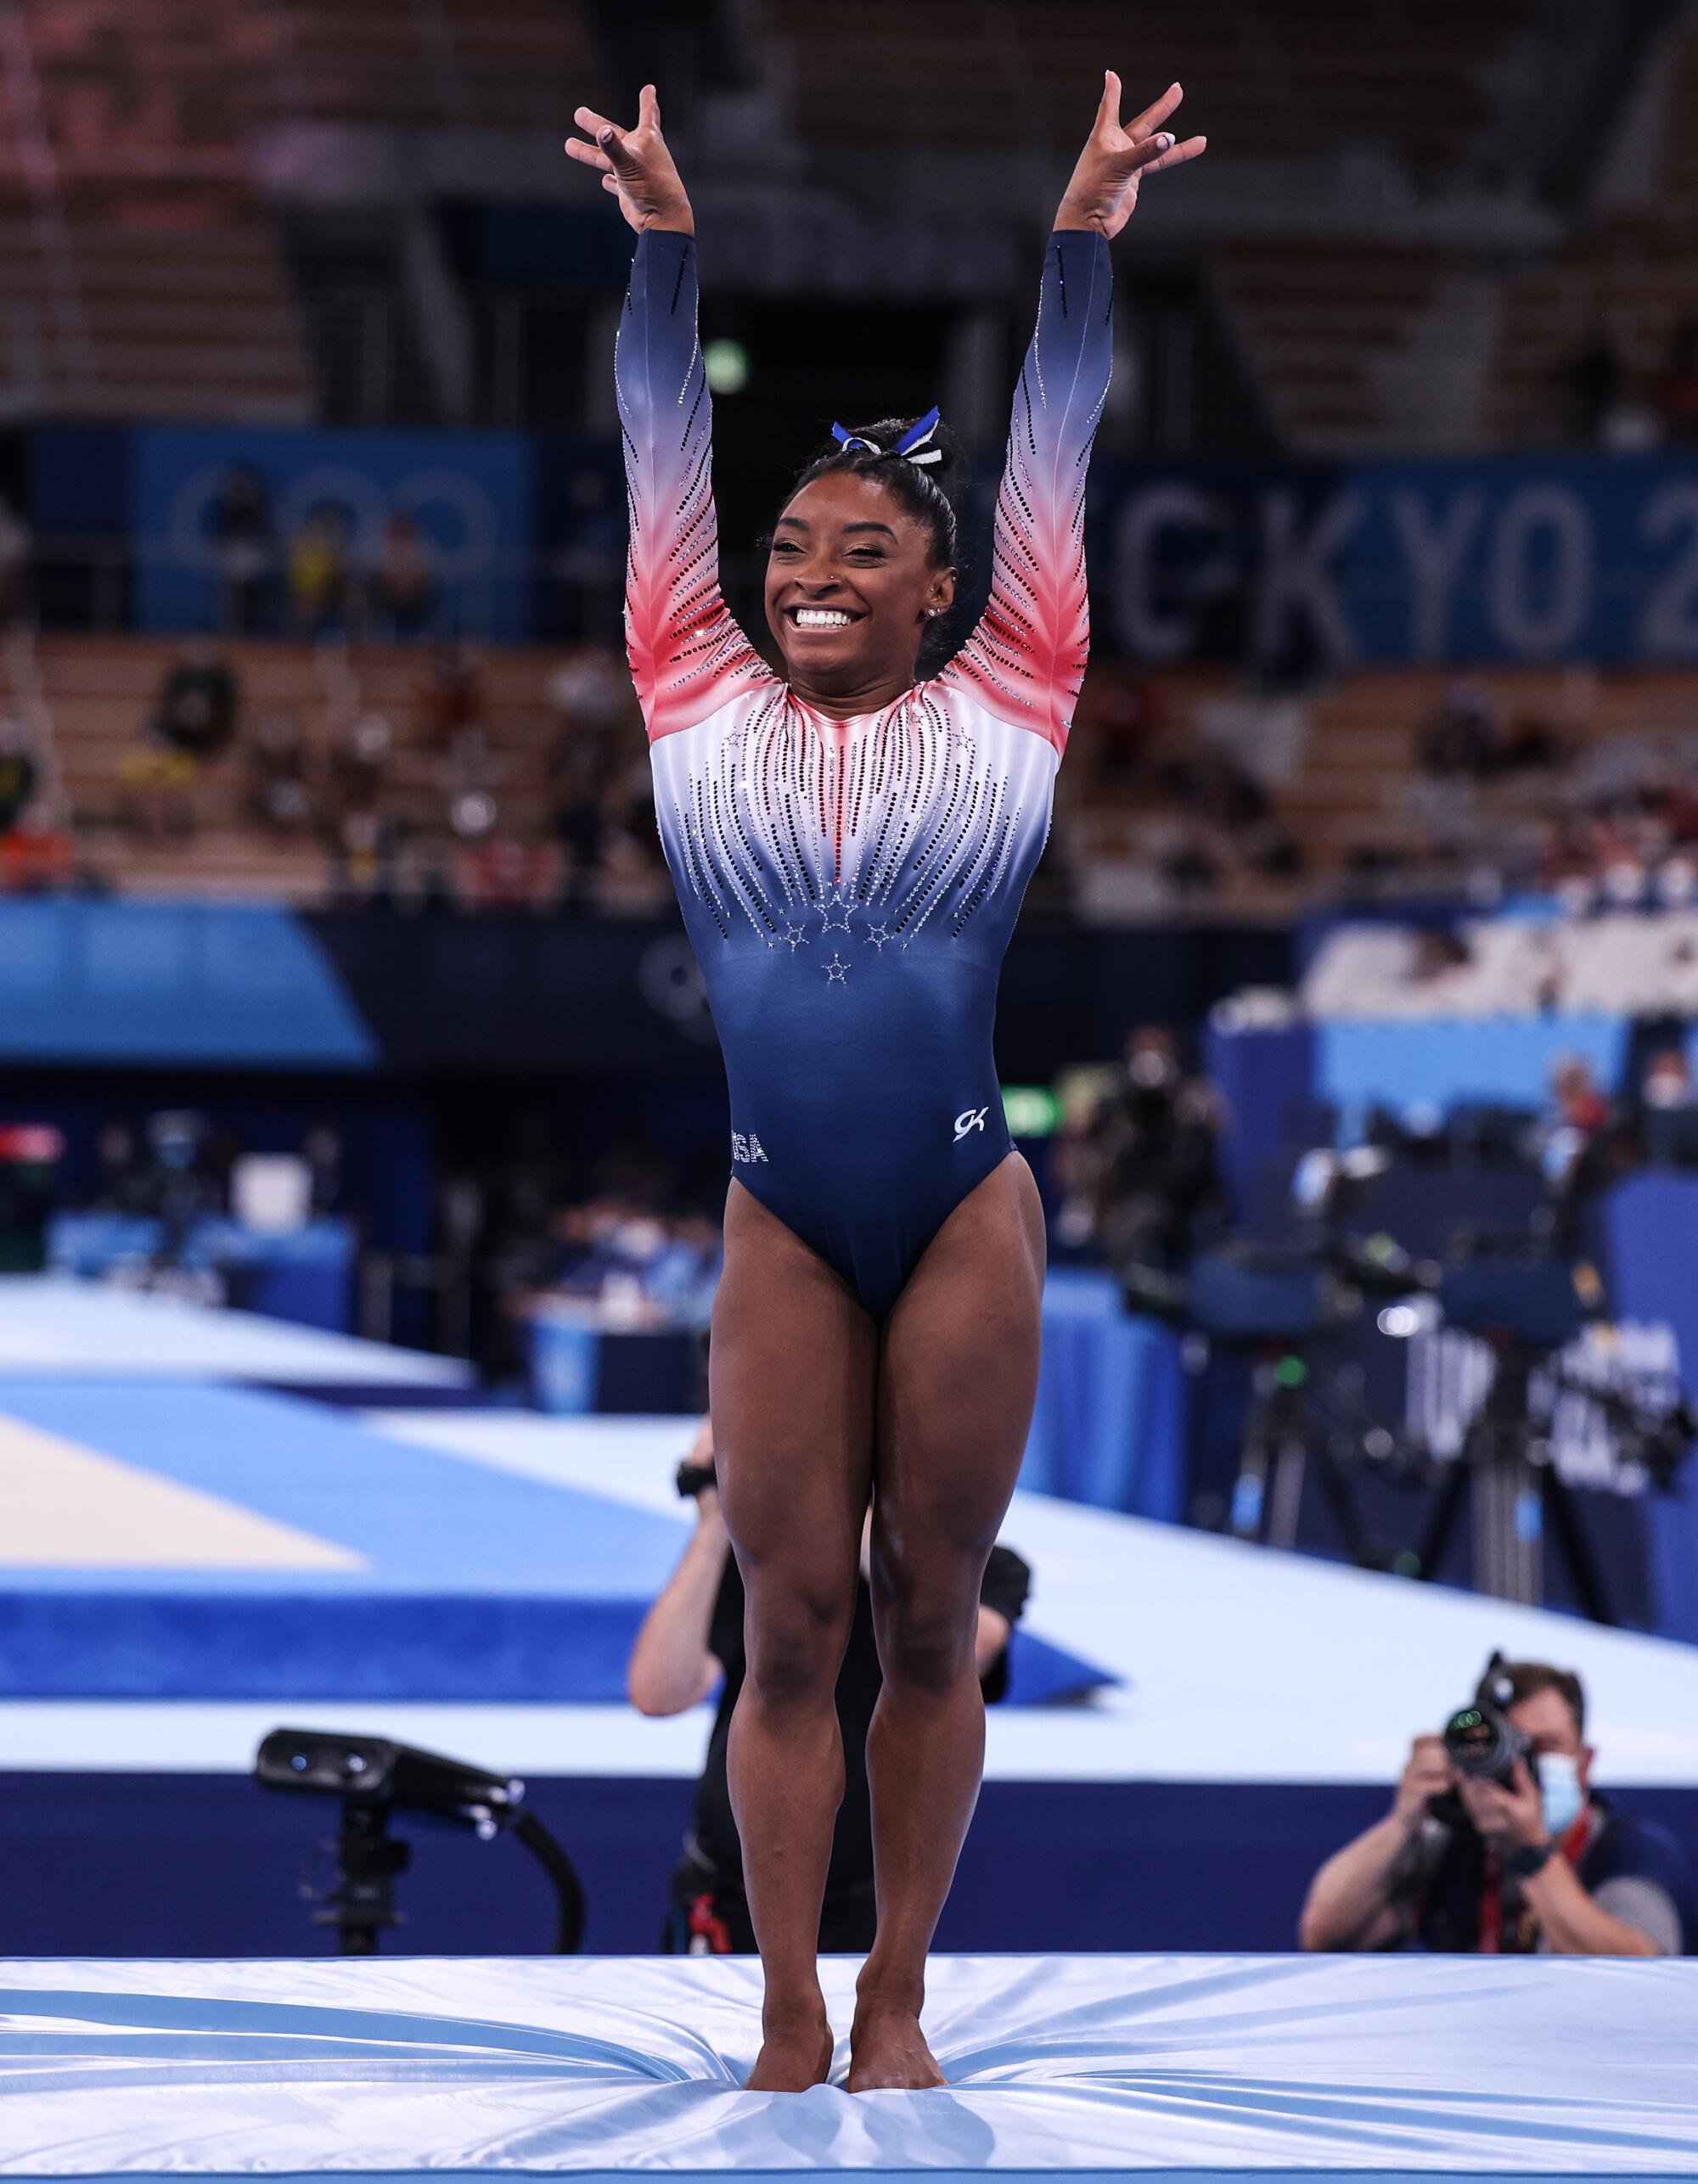 Simone Biles, smiling, stands on the mat with both arms lifted.